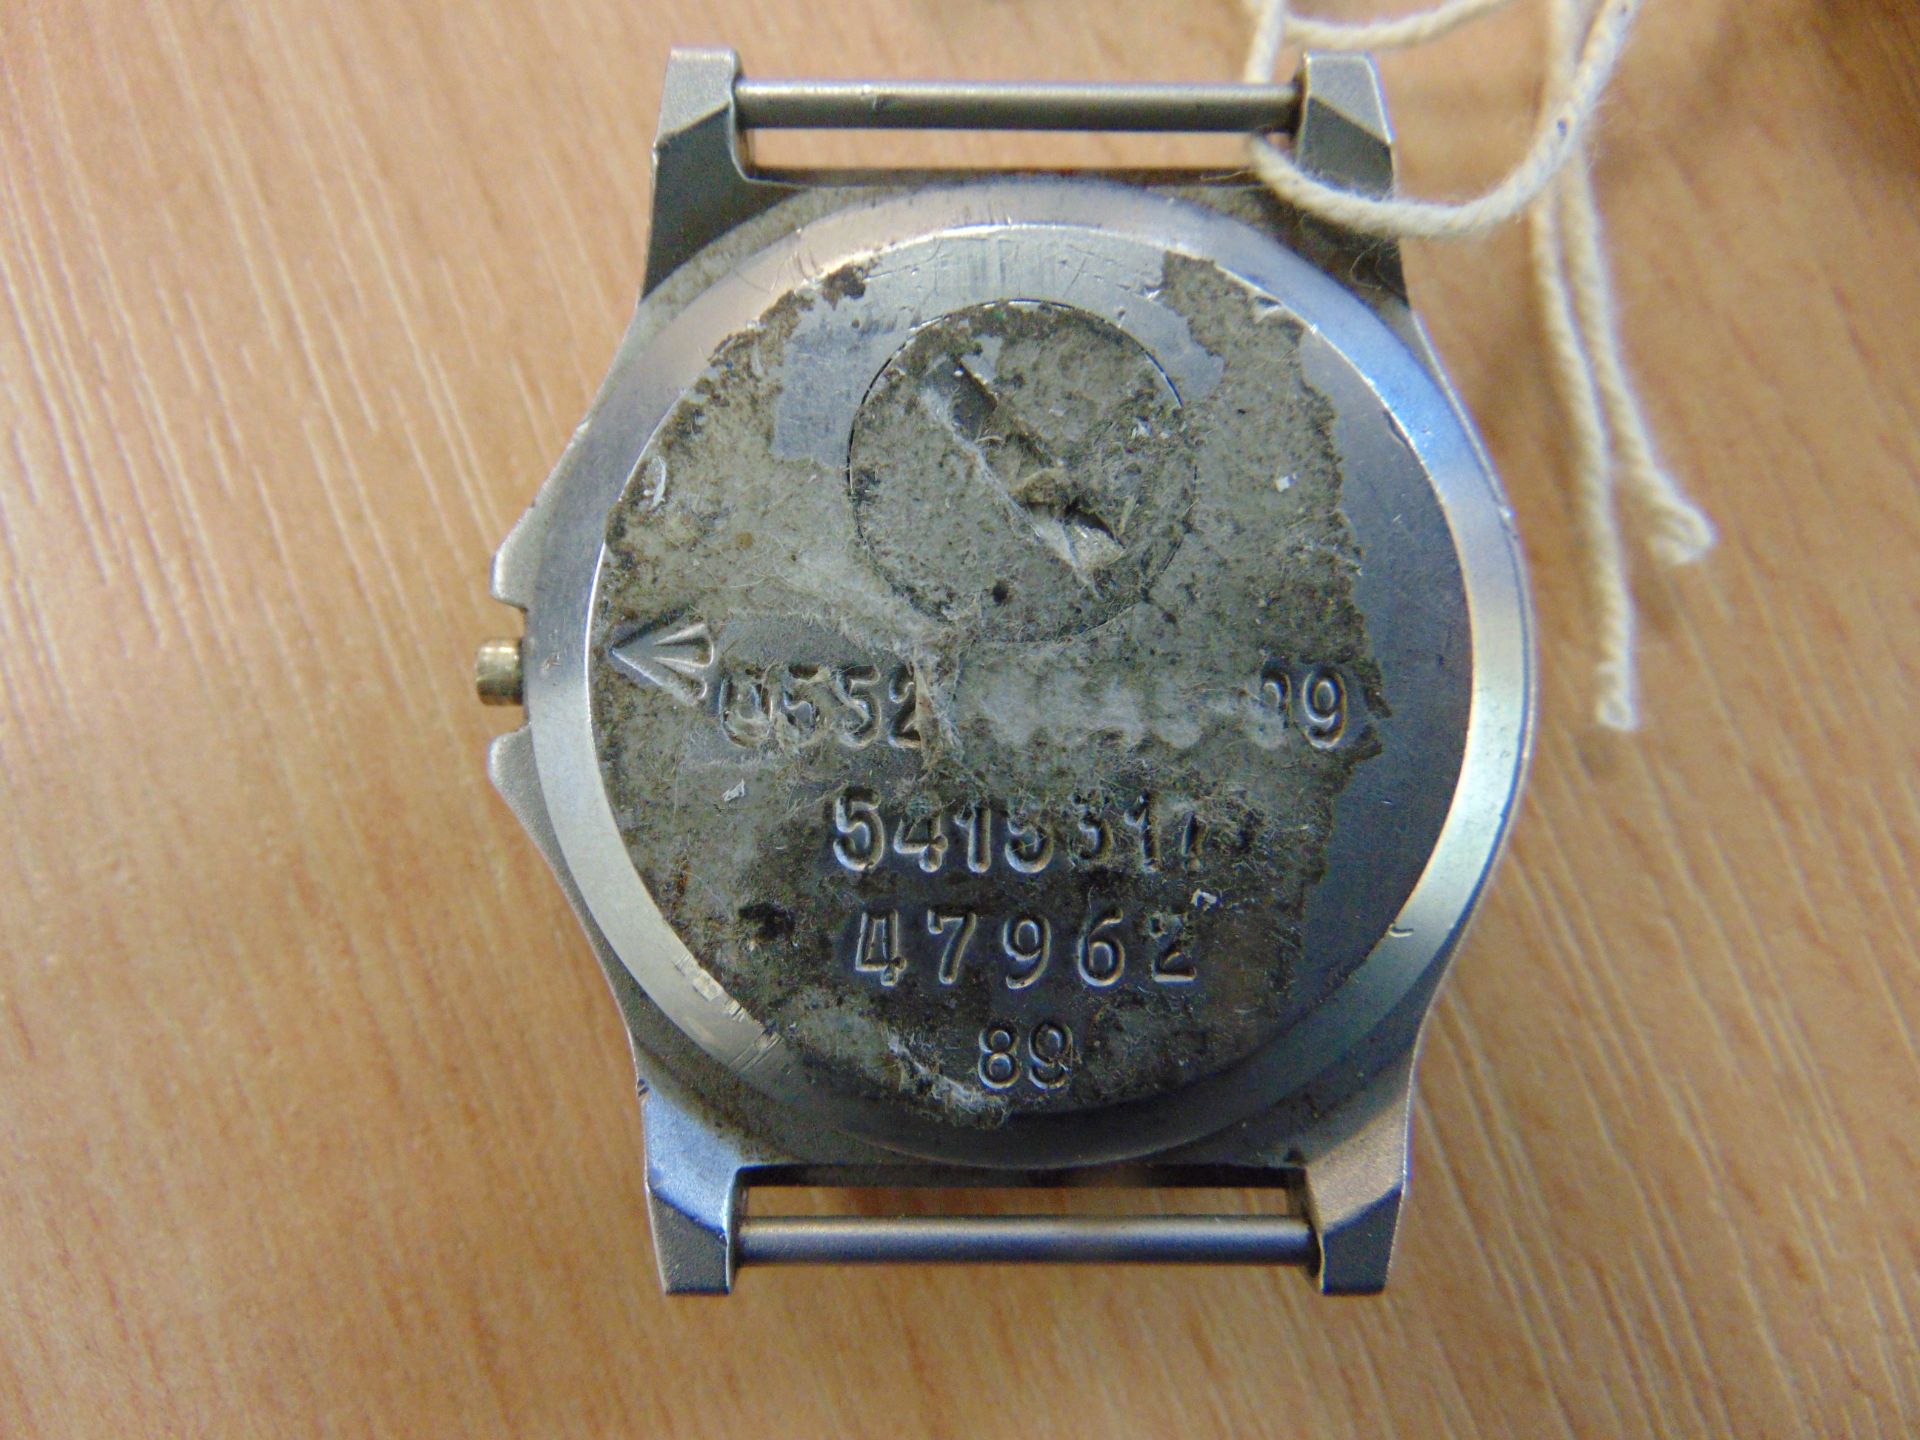 2X CWC 0552 ROYAL MARINES ISSUE SERVICE WATCHES NATO MARKED DATE: 1988/89 - SPARES/ REPAIR - Image 9 of 9